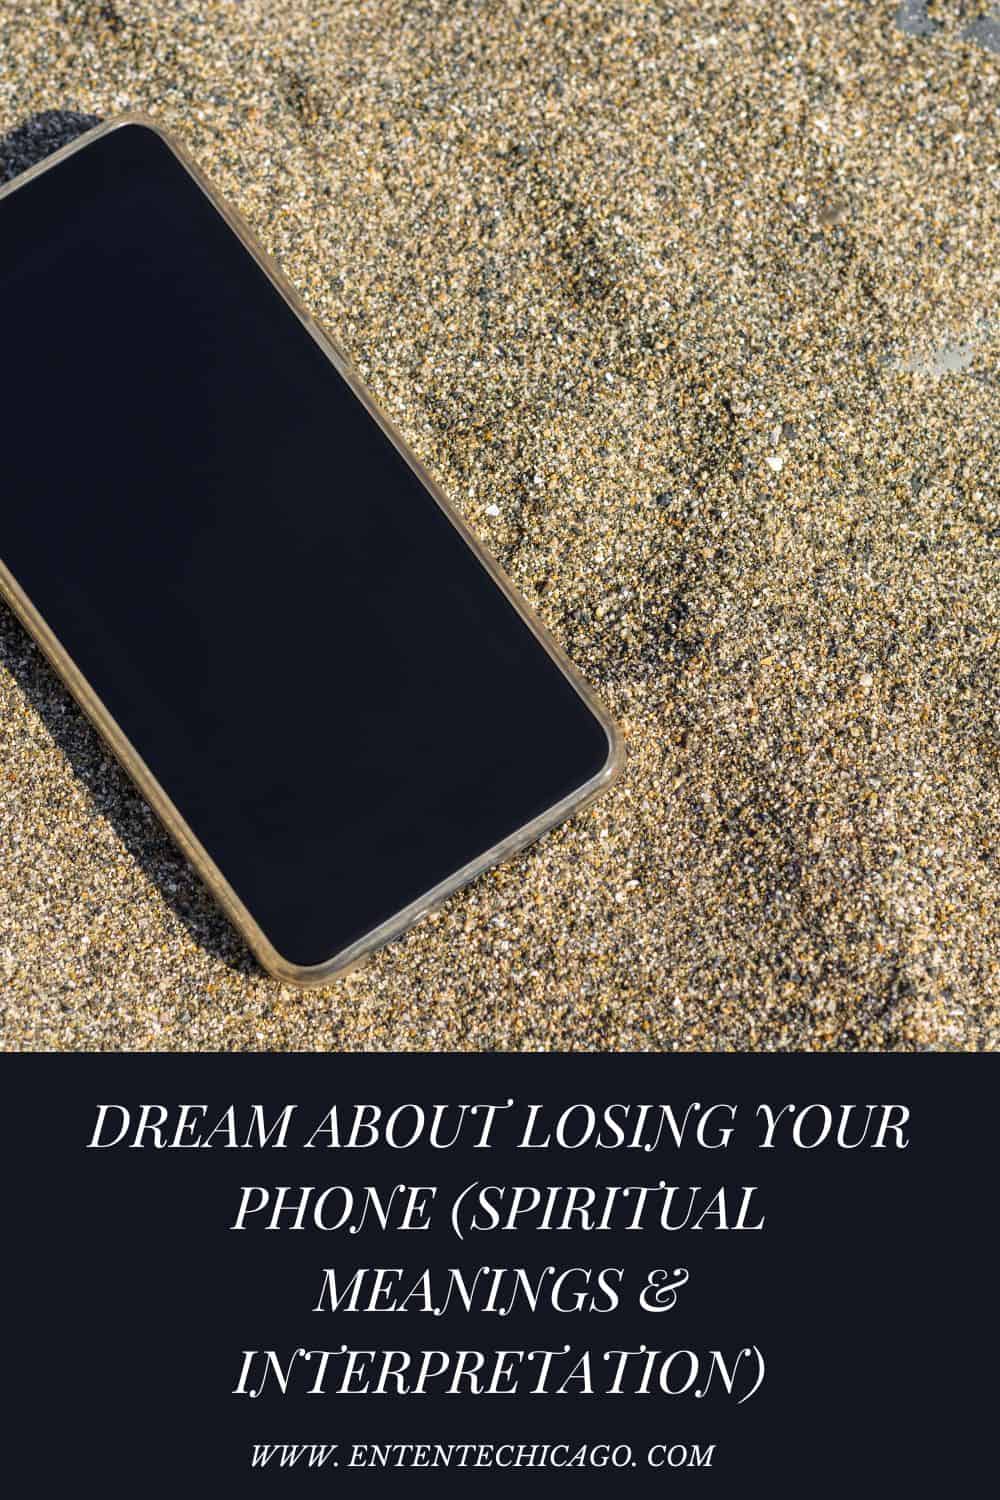 Dream About Losing Your Phone (Spiritual Meanings & Interpretation)